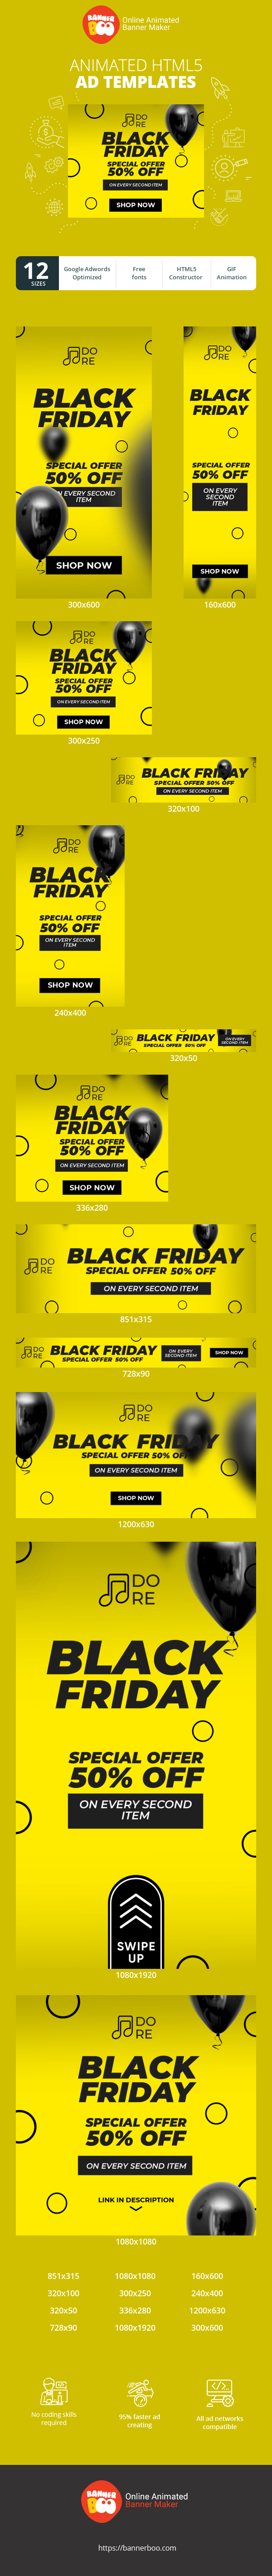 Banner ad template — Black Friday — Special Offer 50% Off On Every Second Item